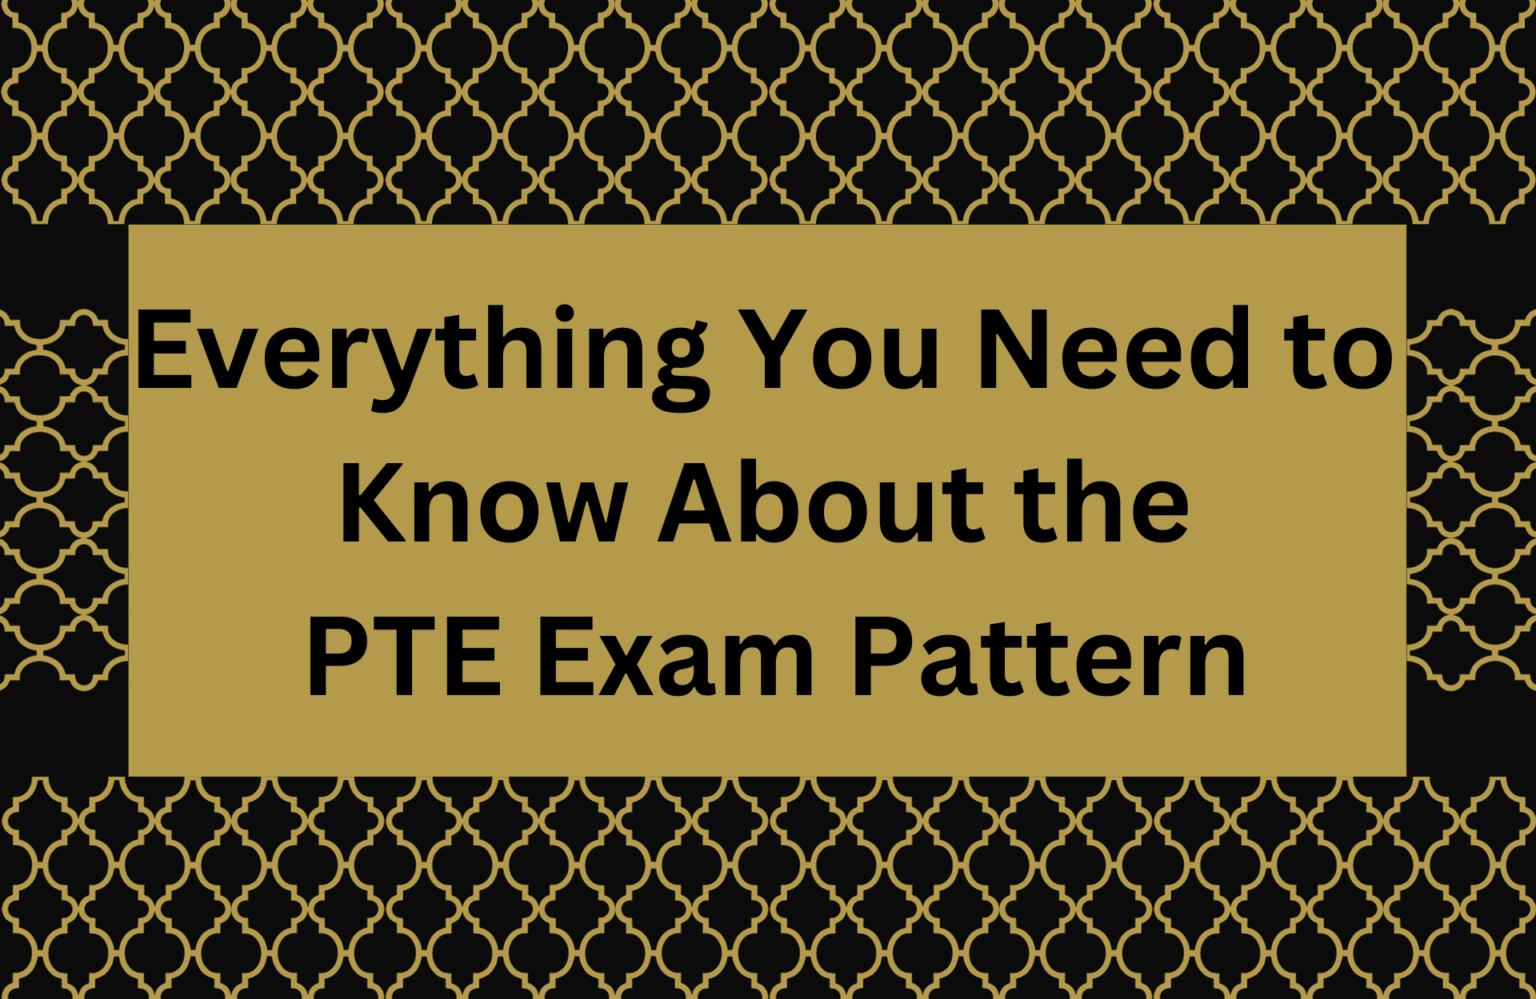 PTE Exam Pattern – Everything You Need to Know About